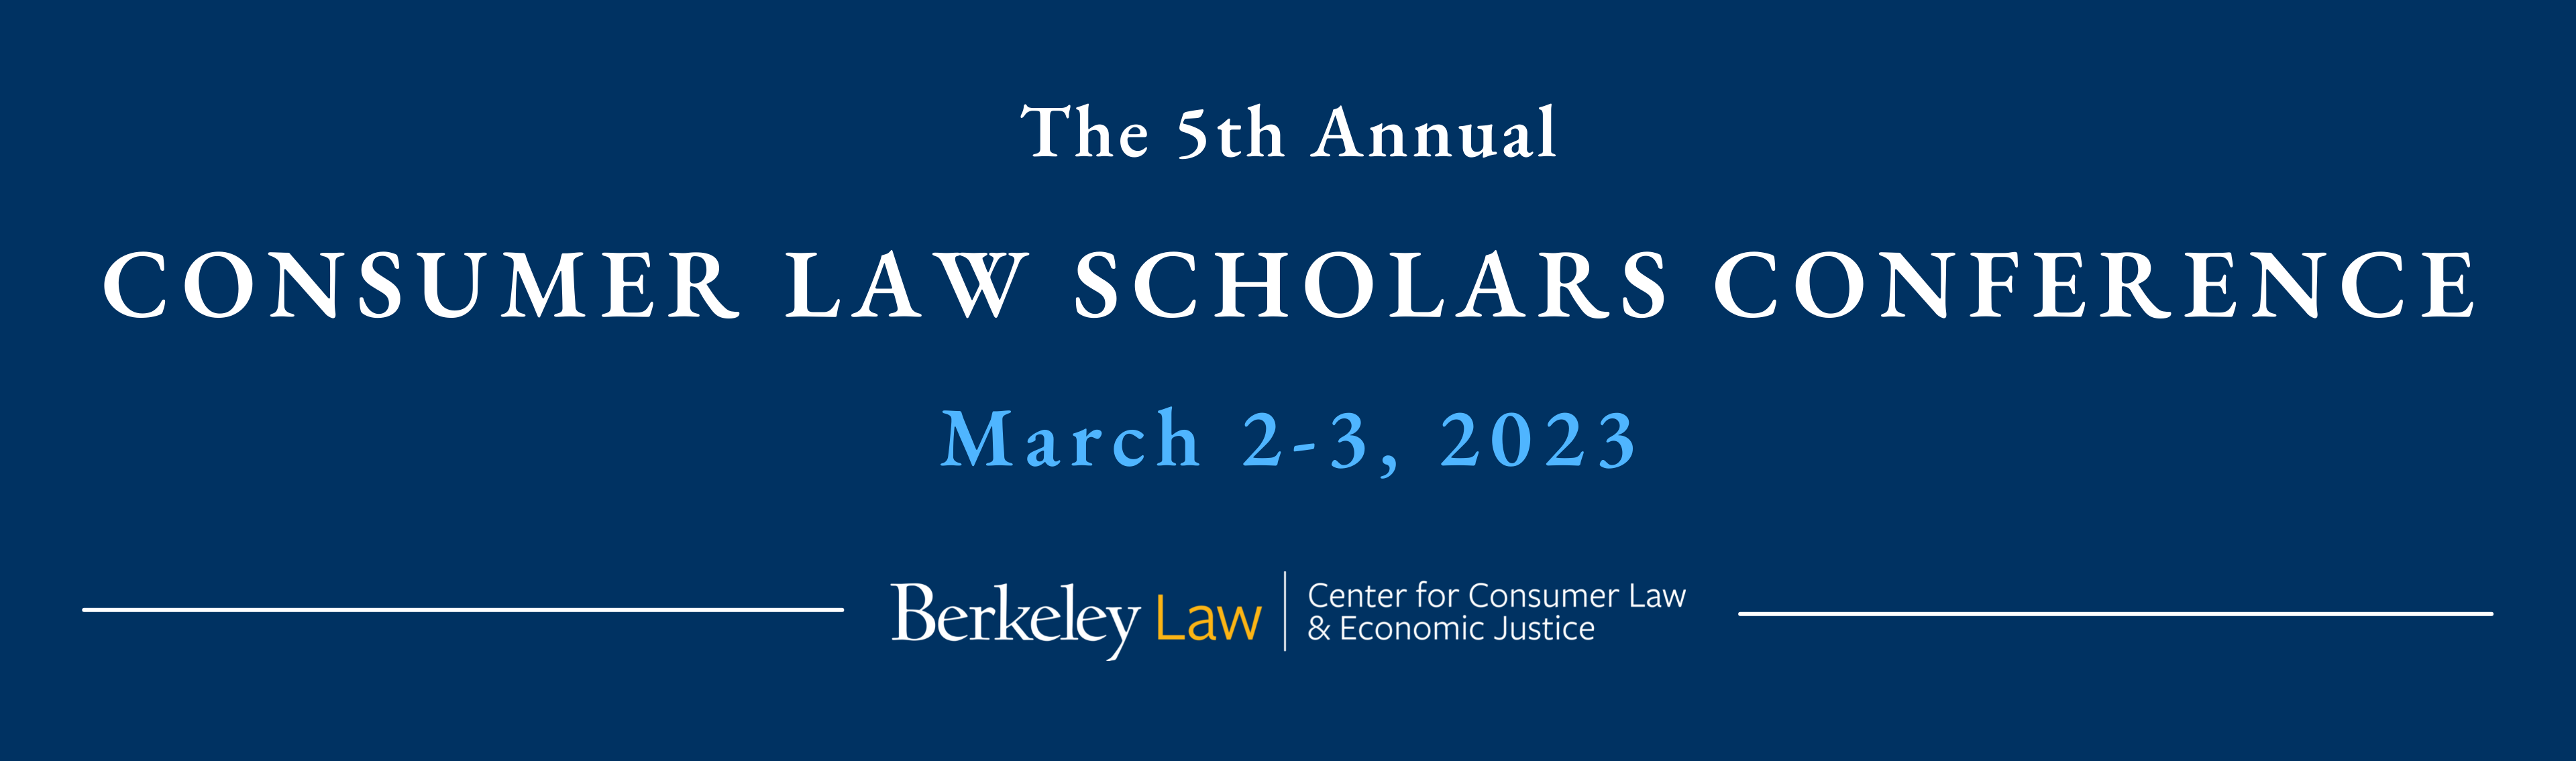 Consumer Law Scholars Conference 2023 Center for Consumer Law